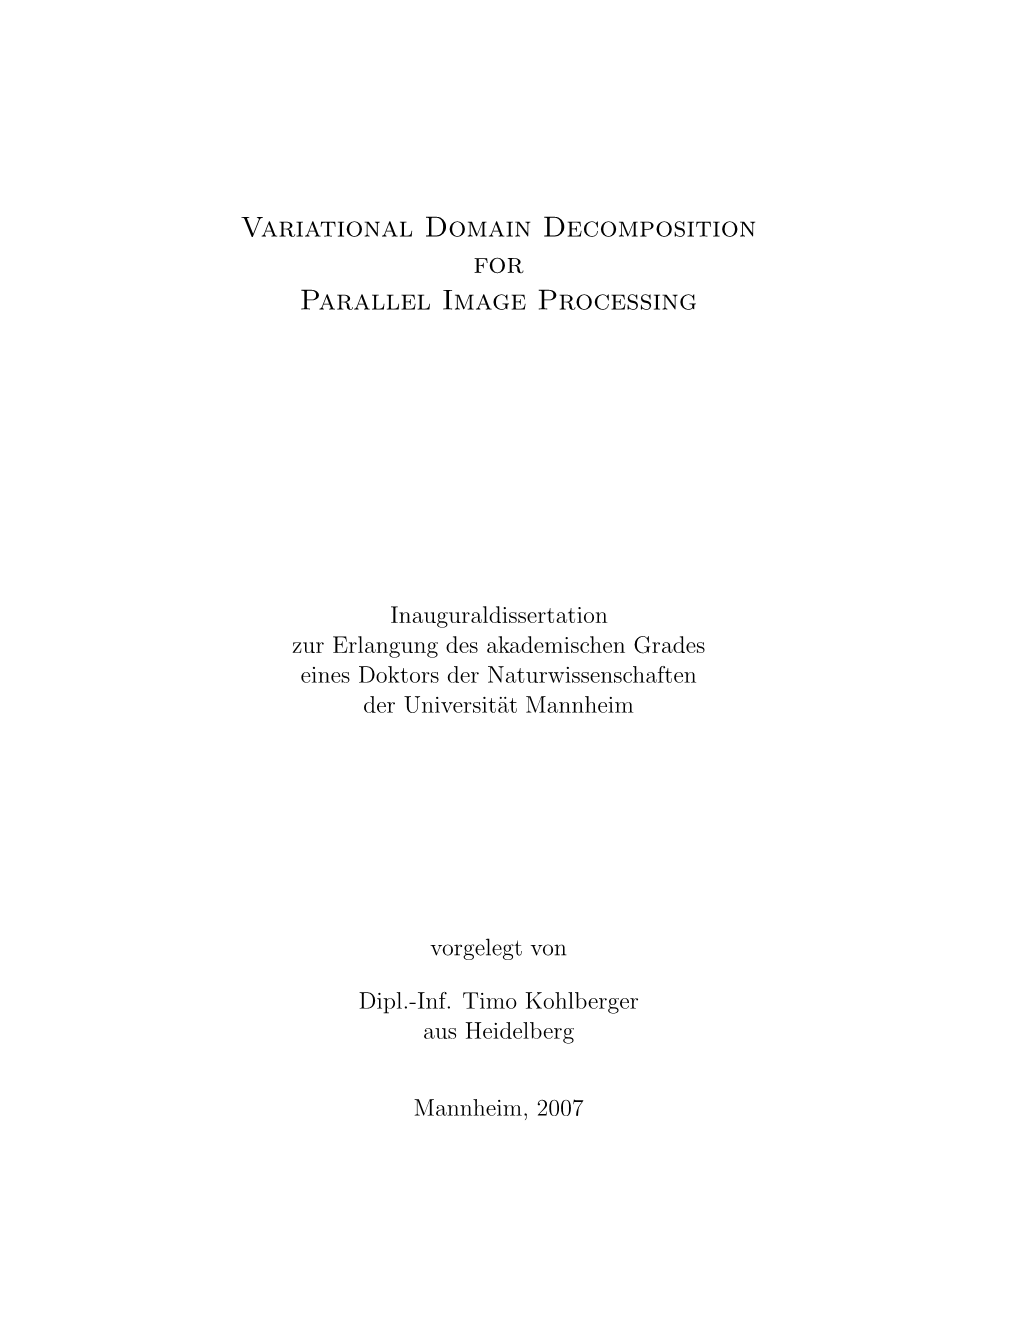 Variational Domain Decomposition for Parallel Image Processing